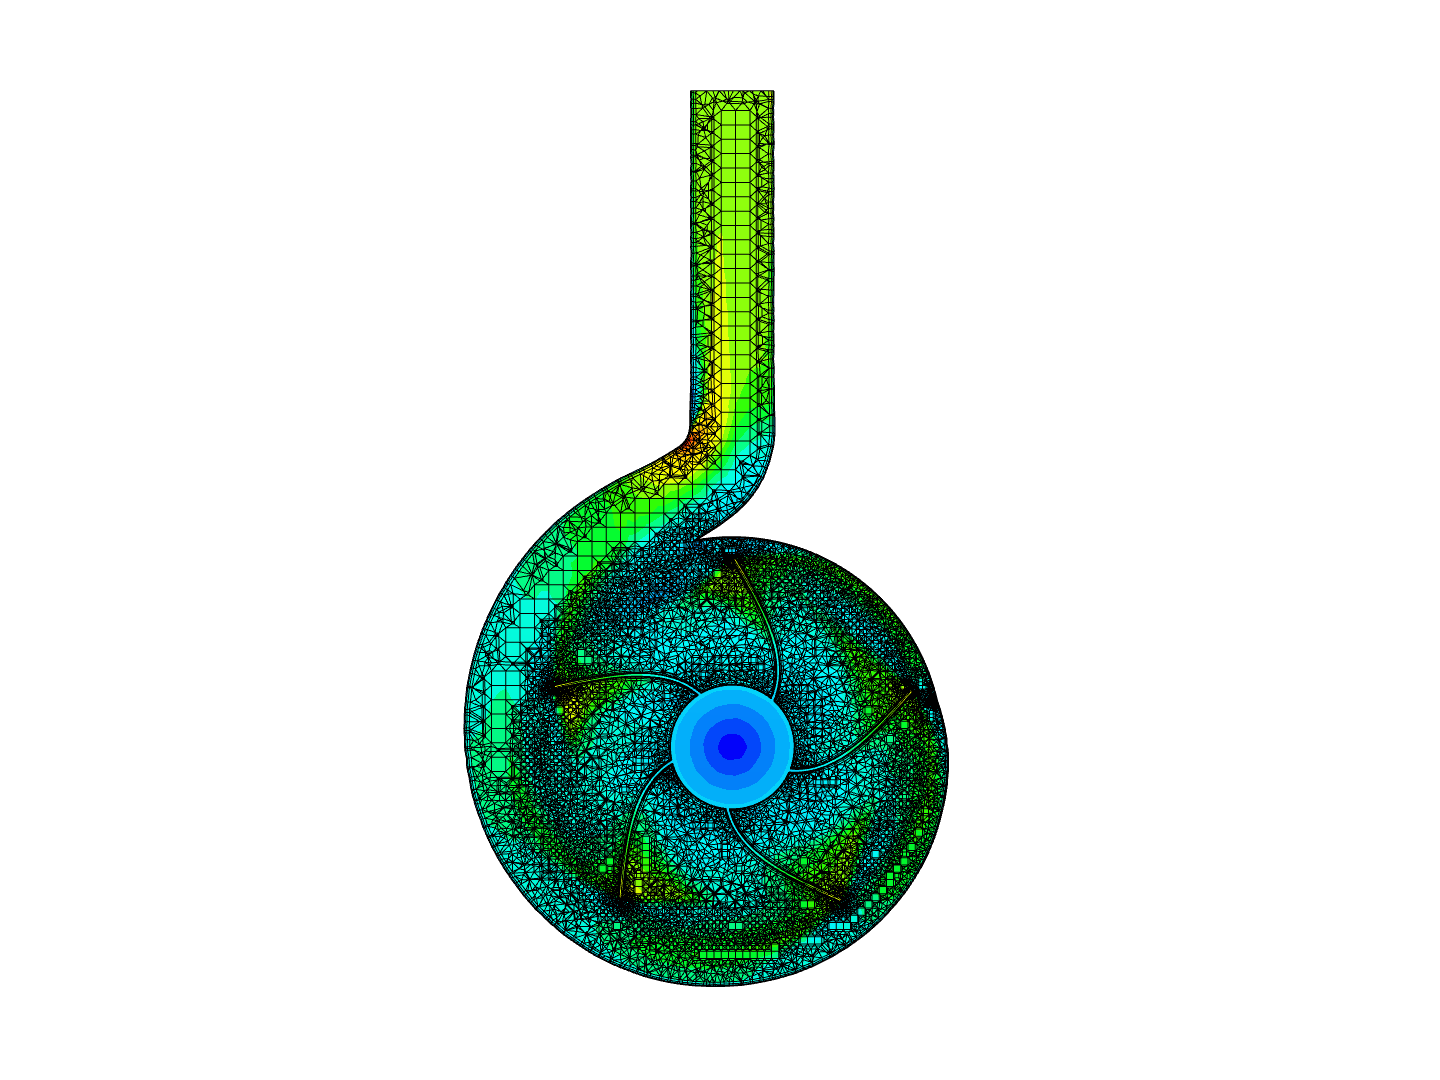 CFD of centrifugal pump image